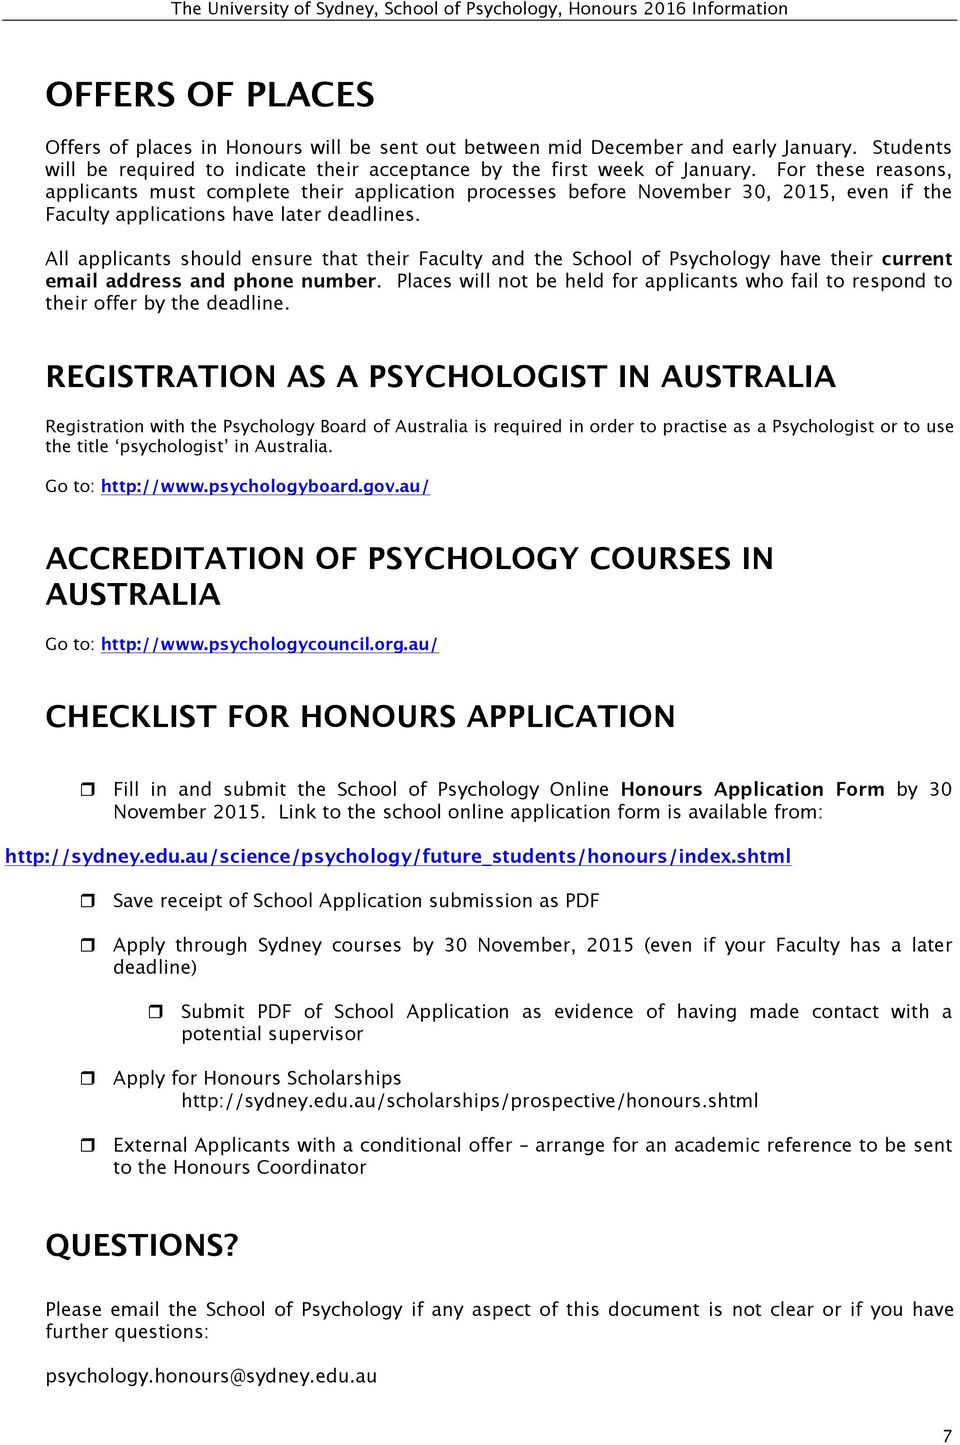 All applicants should ensure that their Faculty and the School of Psychology have their current email address and phone number.